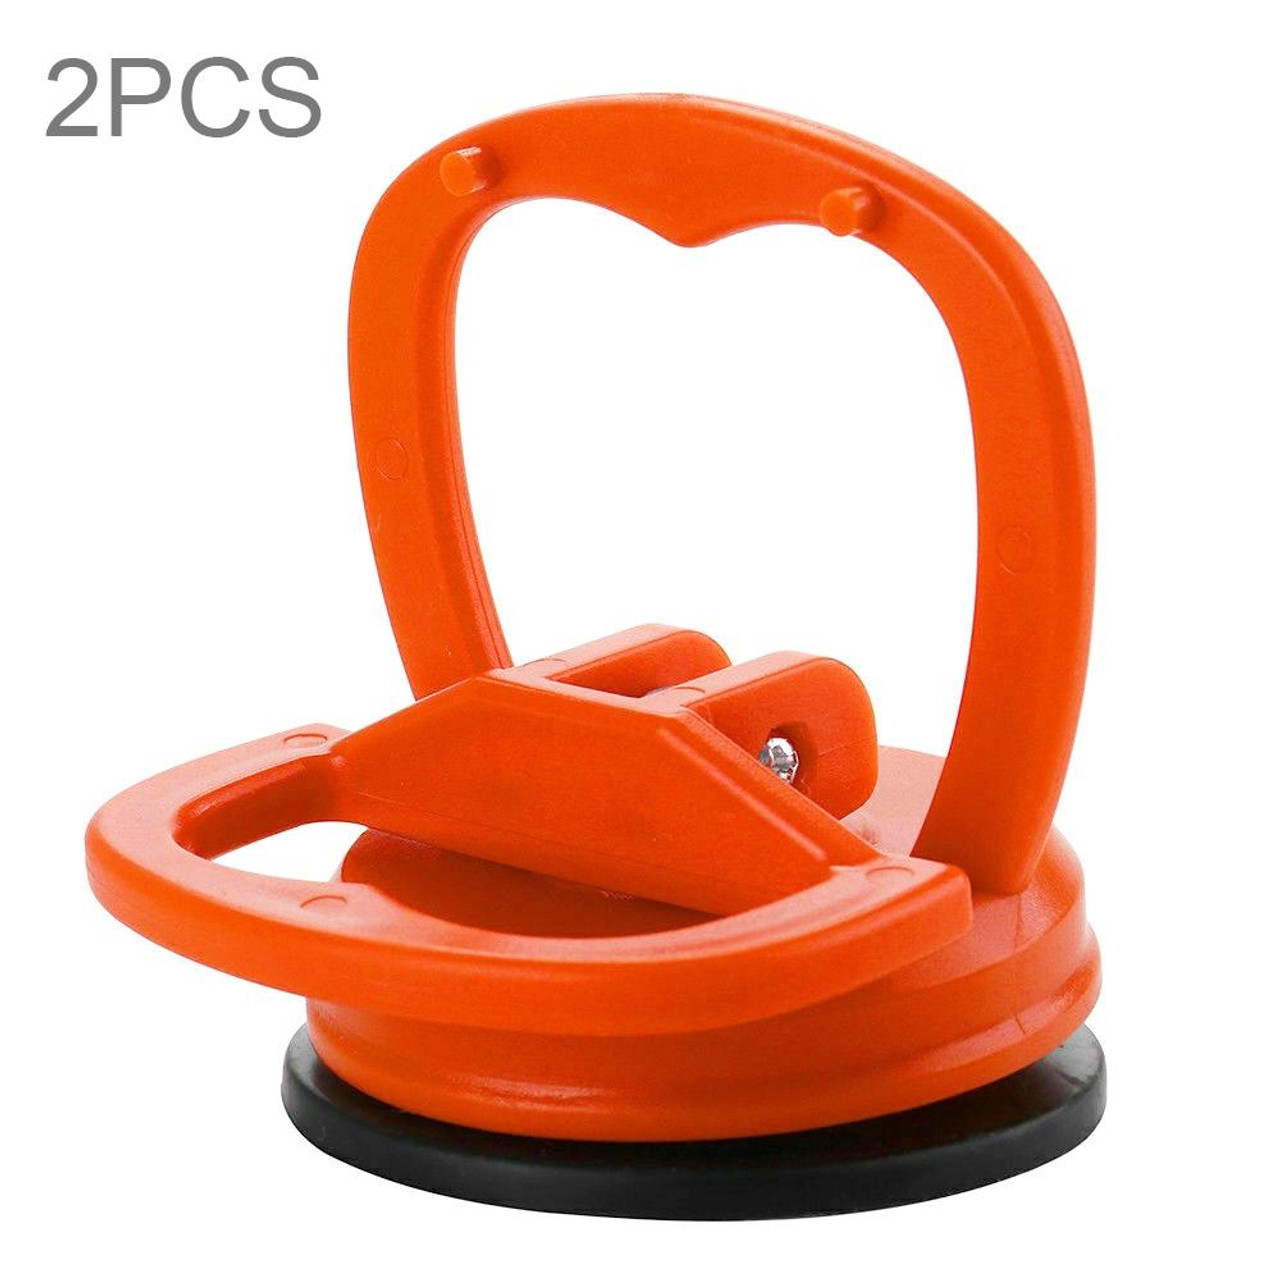 Sucker Suction Cup Tool For Car Bodywork Dent Repair Puller Remover Orange  Small